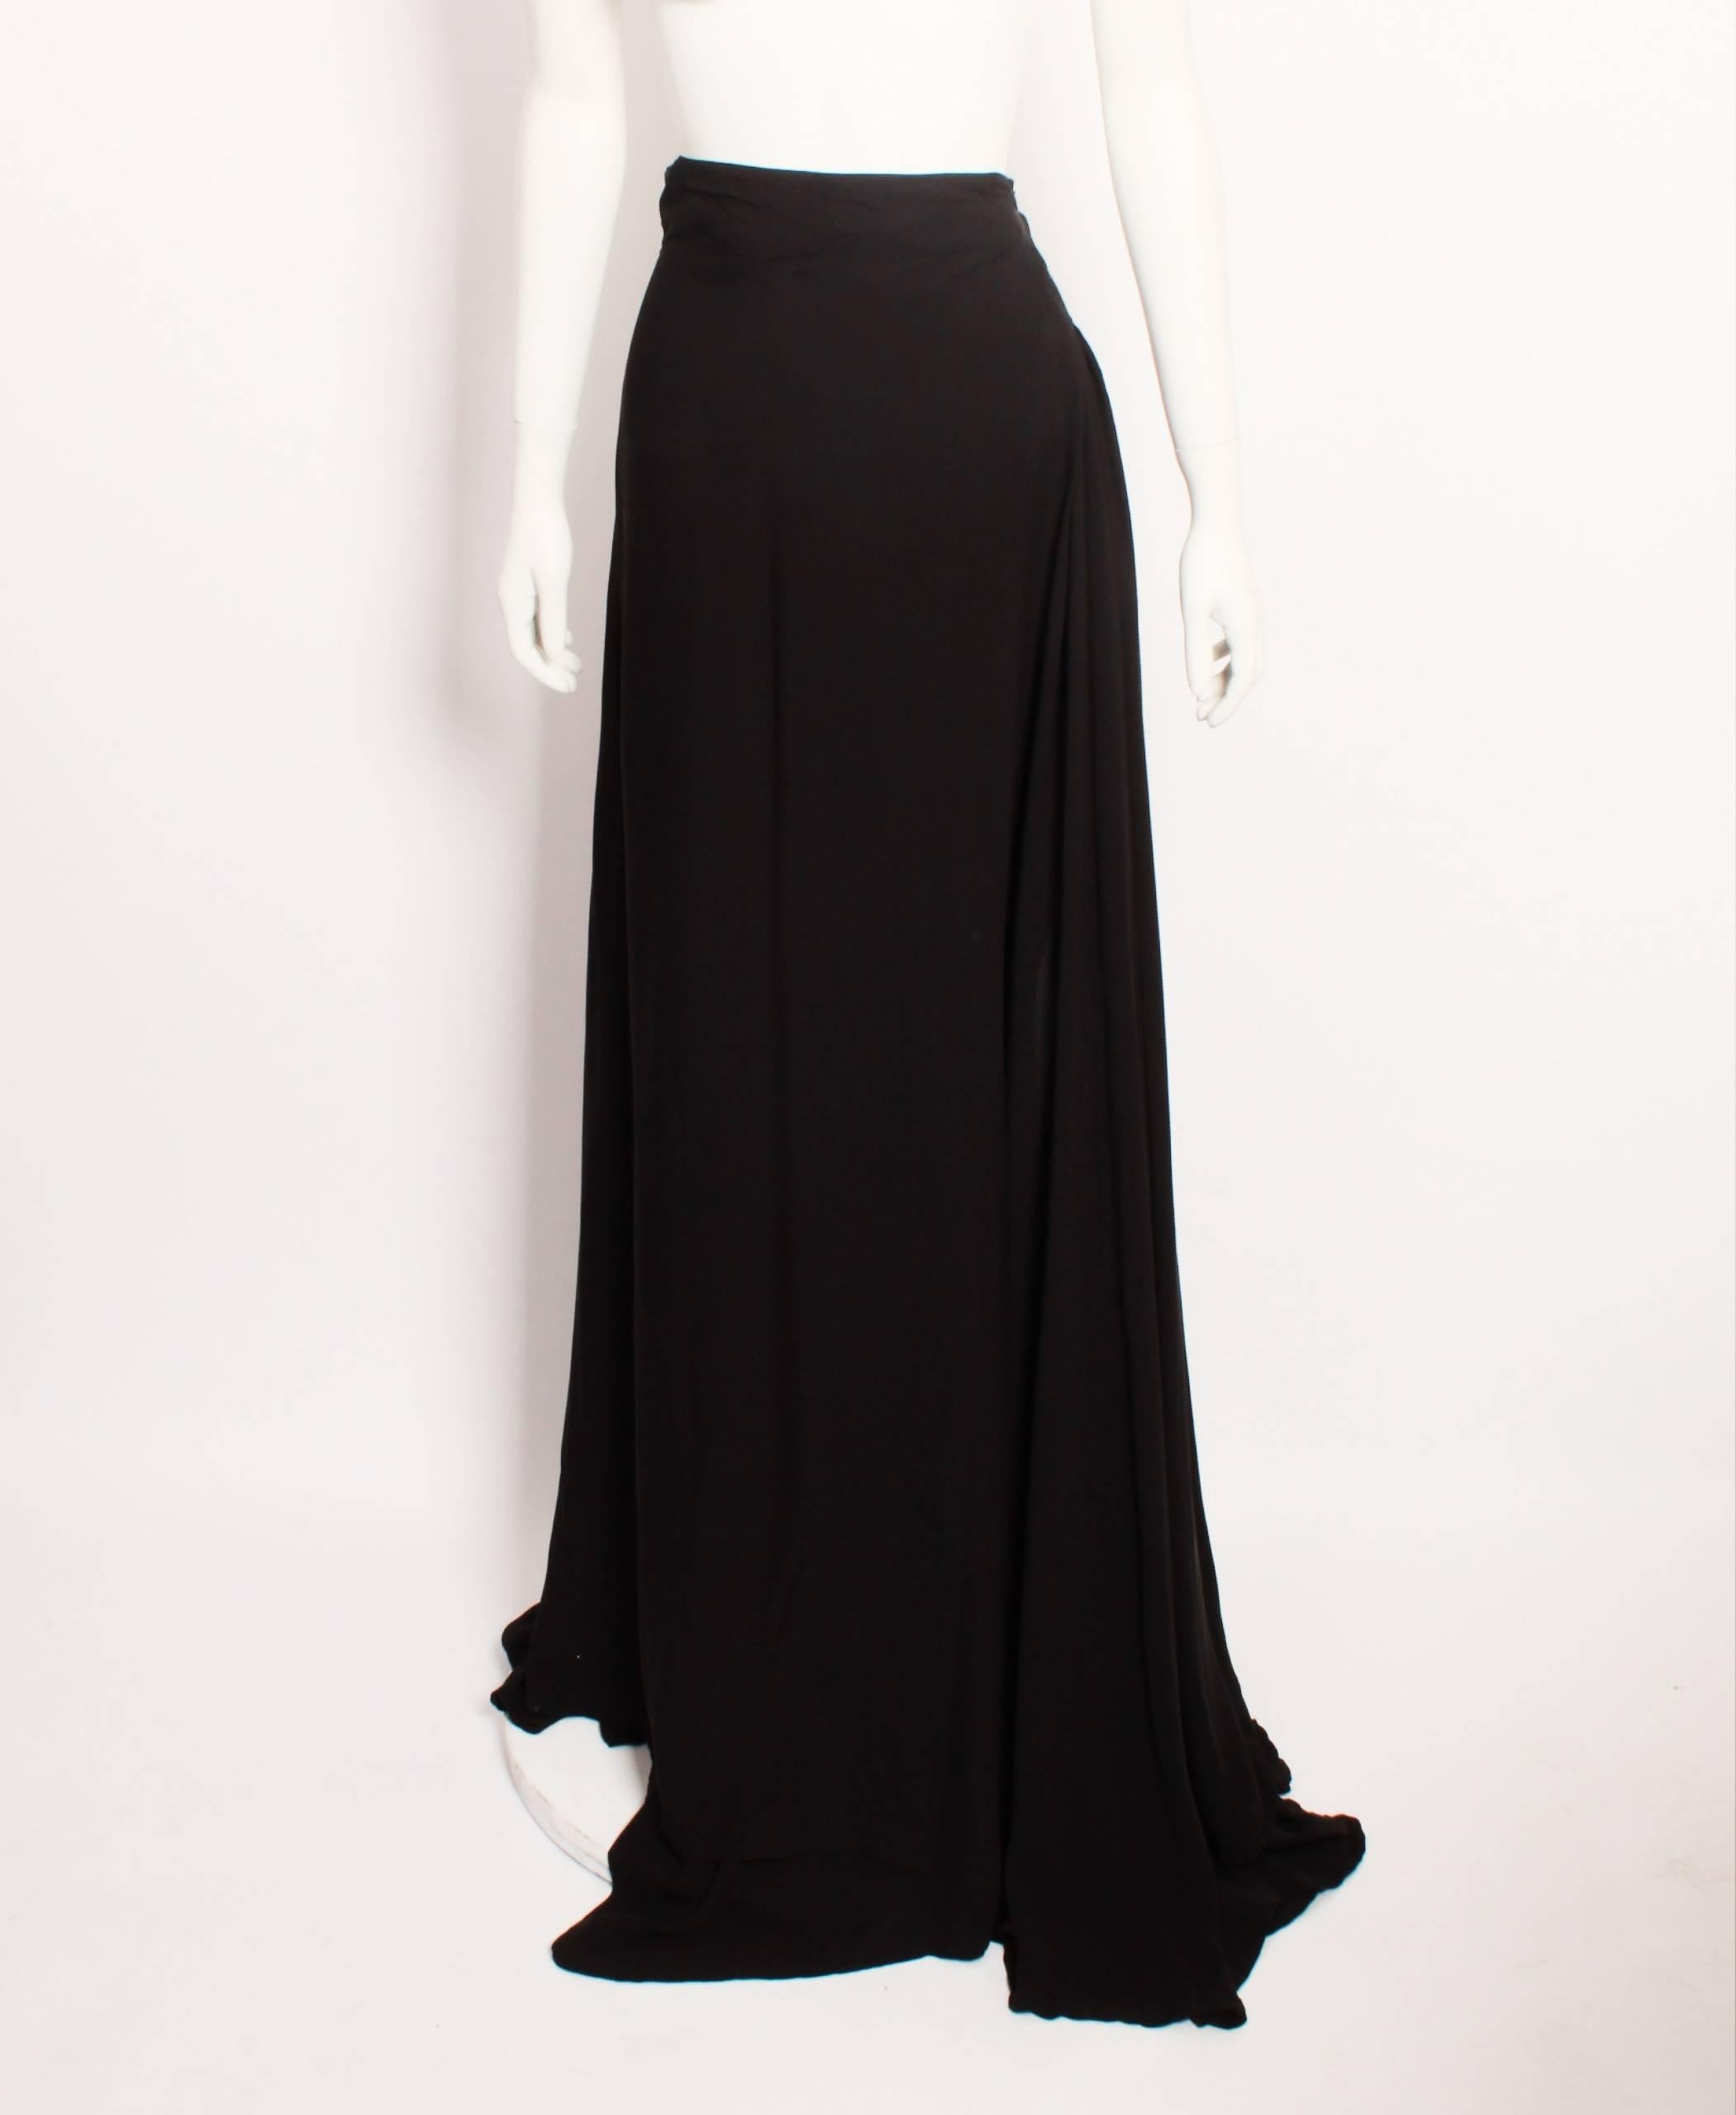 Ann Demeulemeester black silk georgette maxi wrap skirt features voluminous full length flared panels with the added fullness of inverted pleated panels.  Fastens with adjustable waist ties.
Made in Belgium. Size 42.